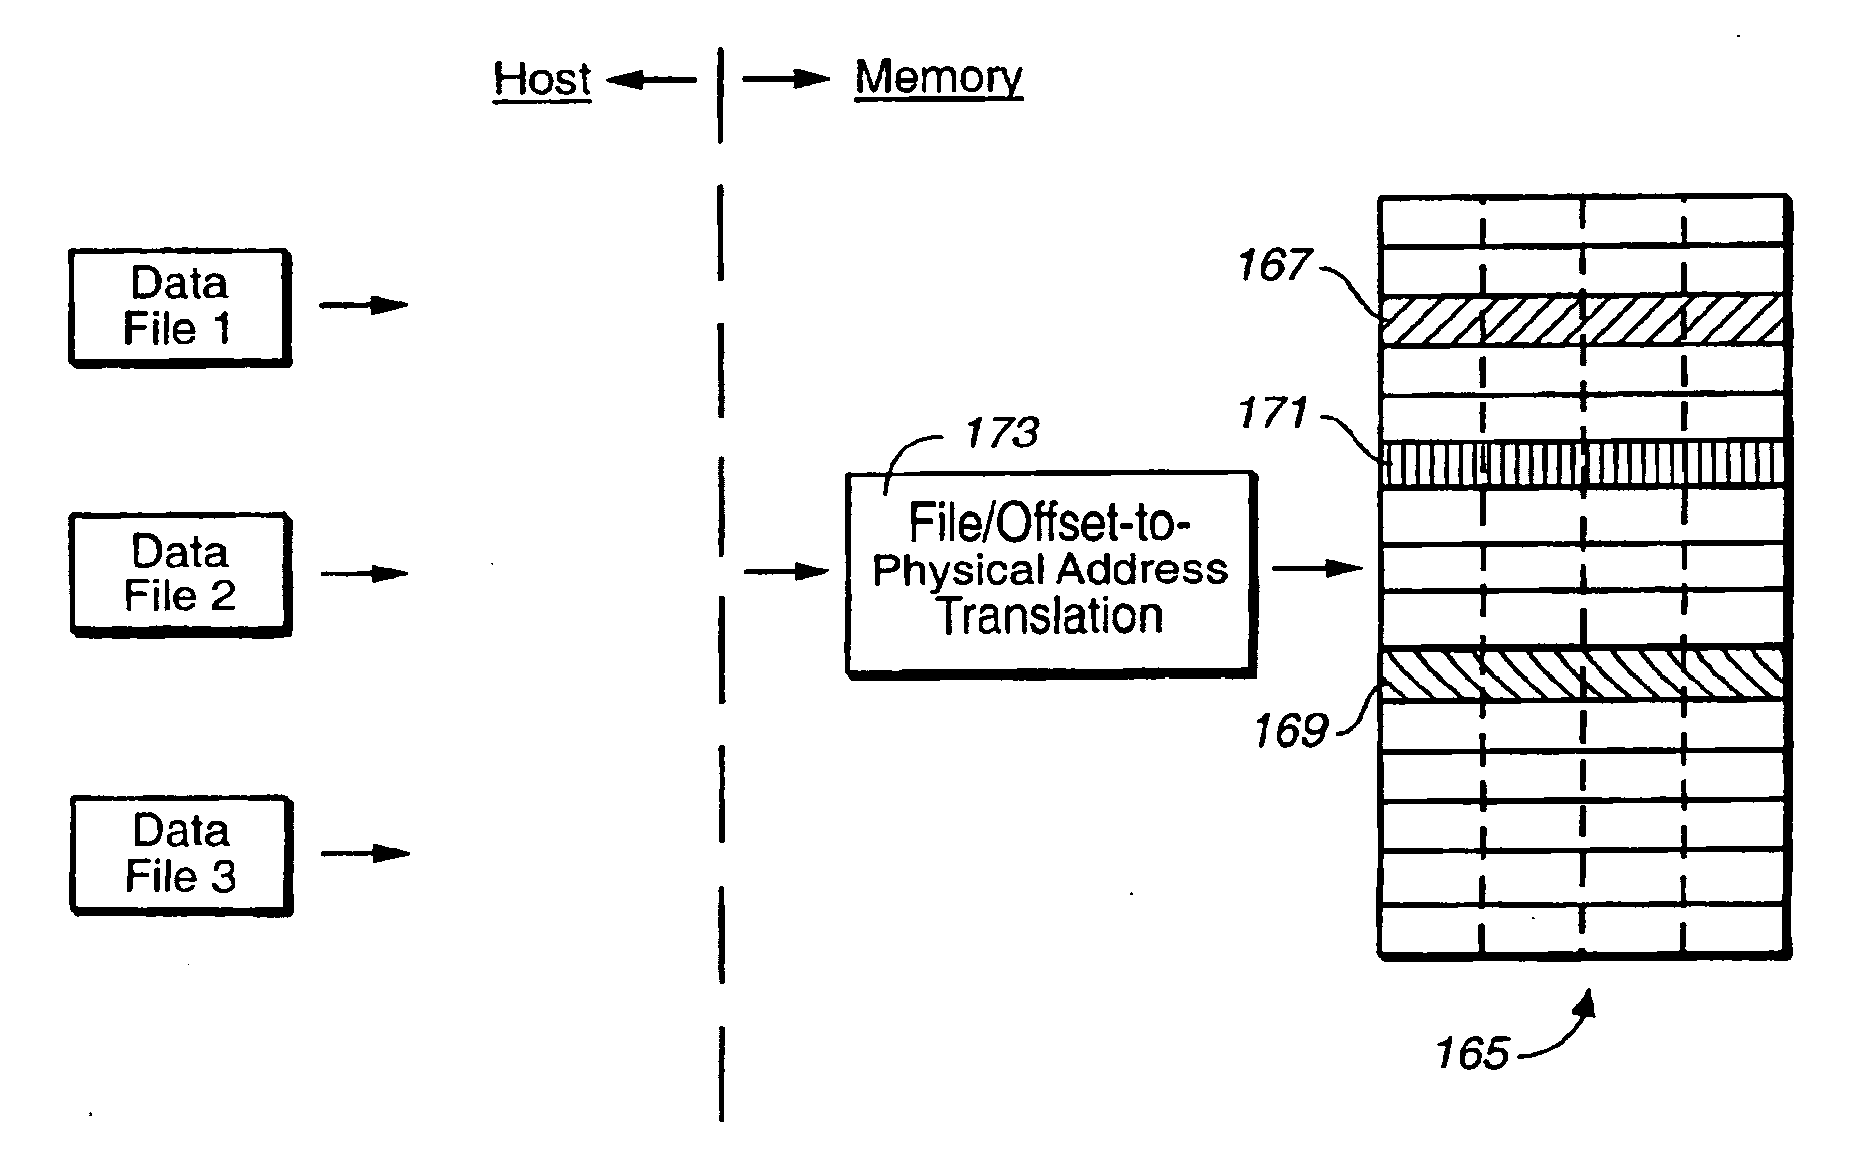 Methods for data alignment in non-volatile memories with a directly mapped file storage system